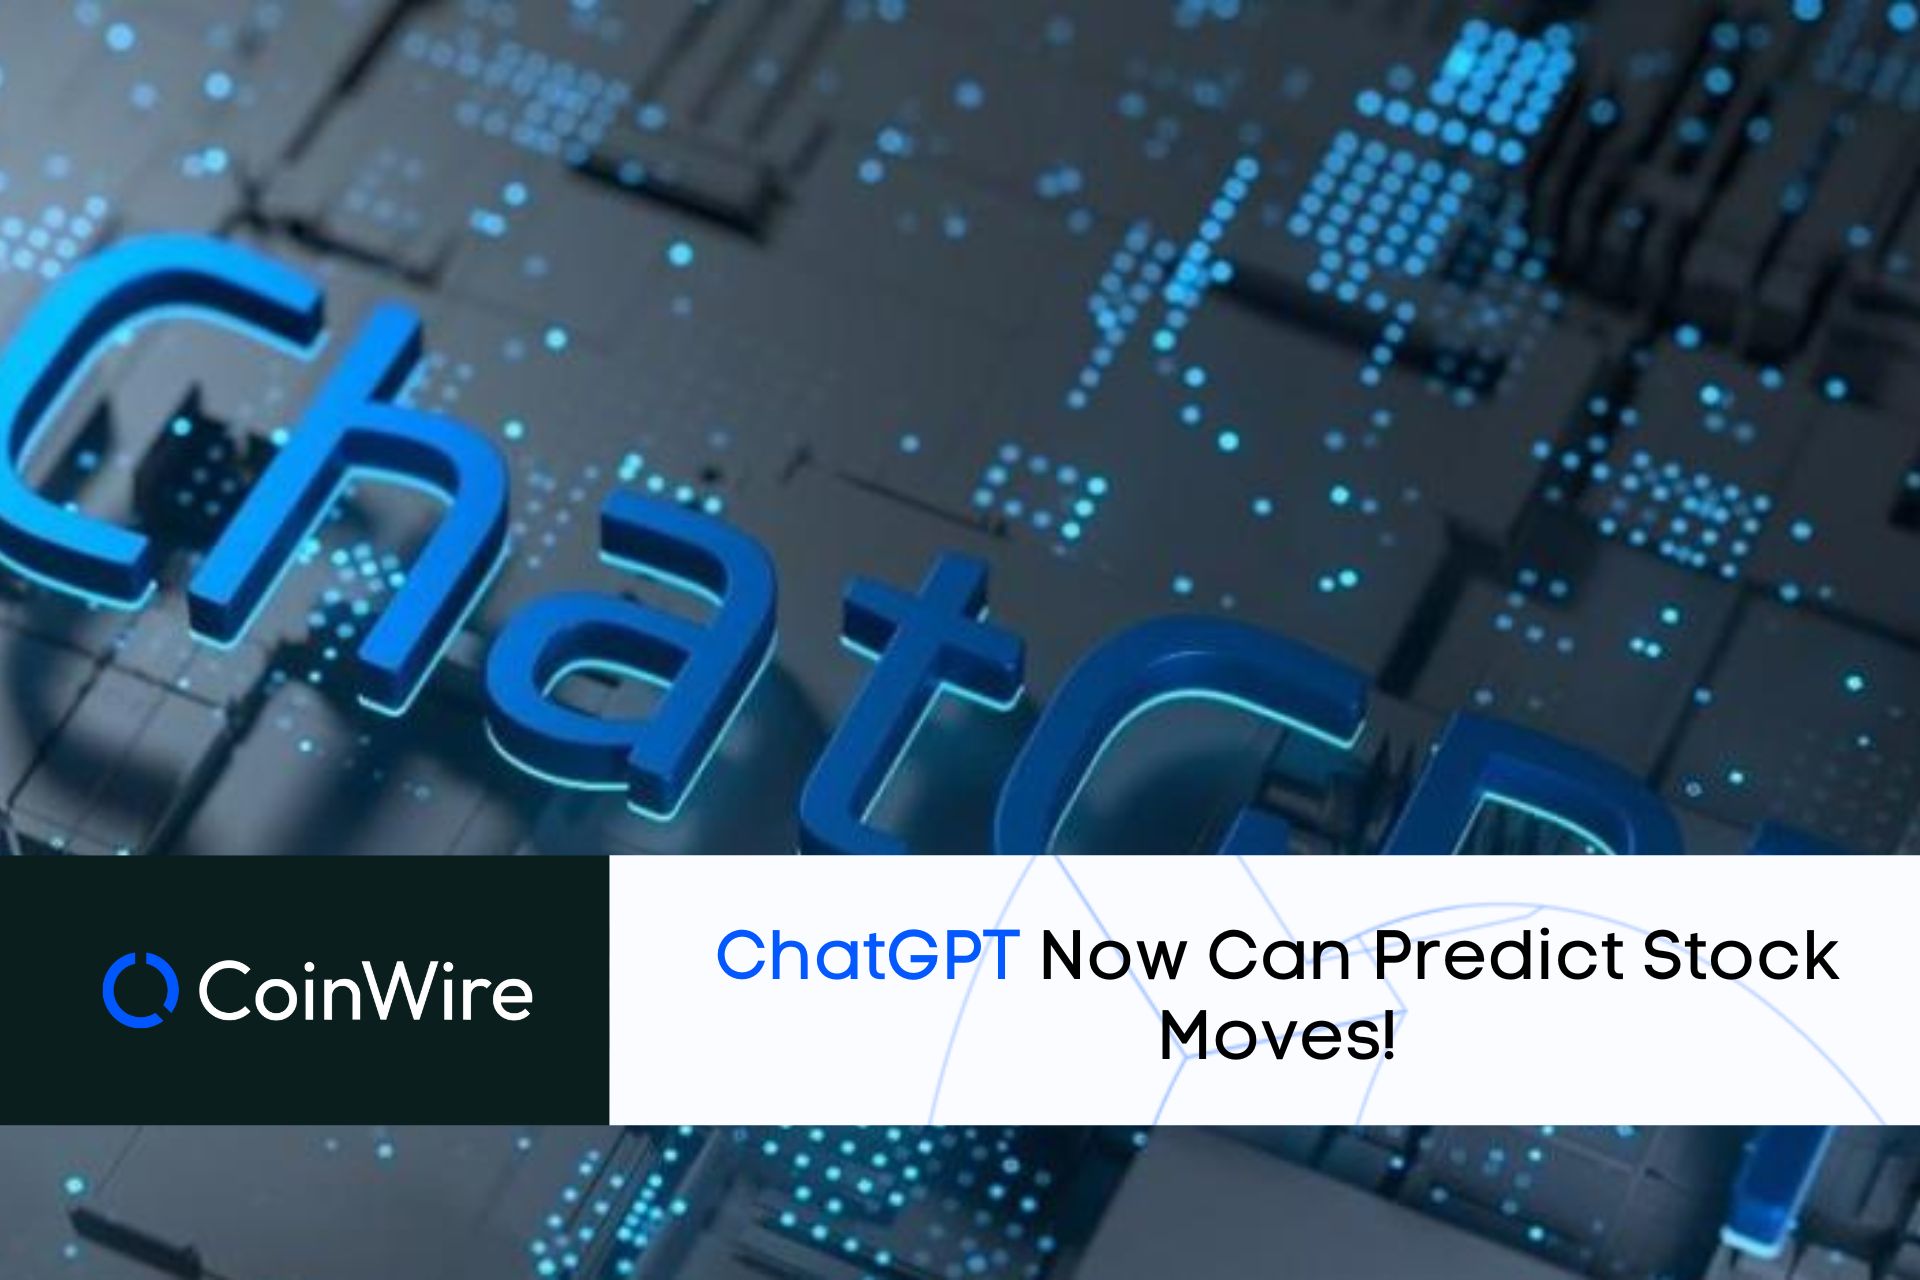 Chatgpt Now Can Predict Stock Moves!